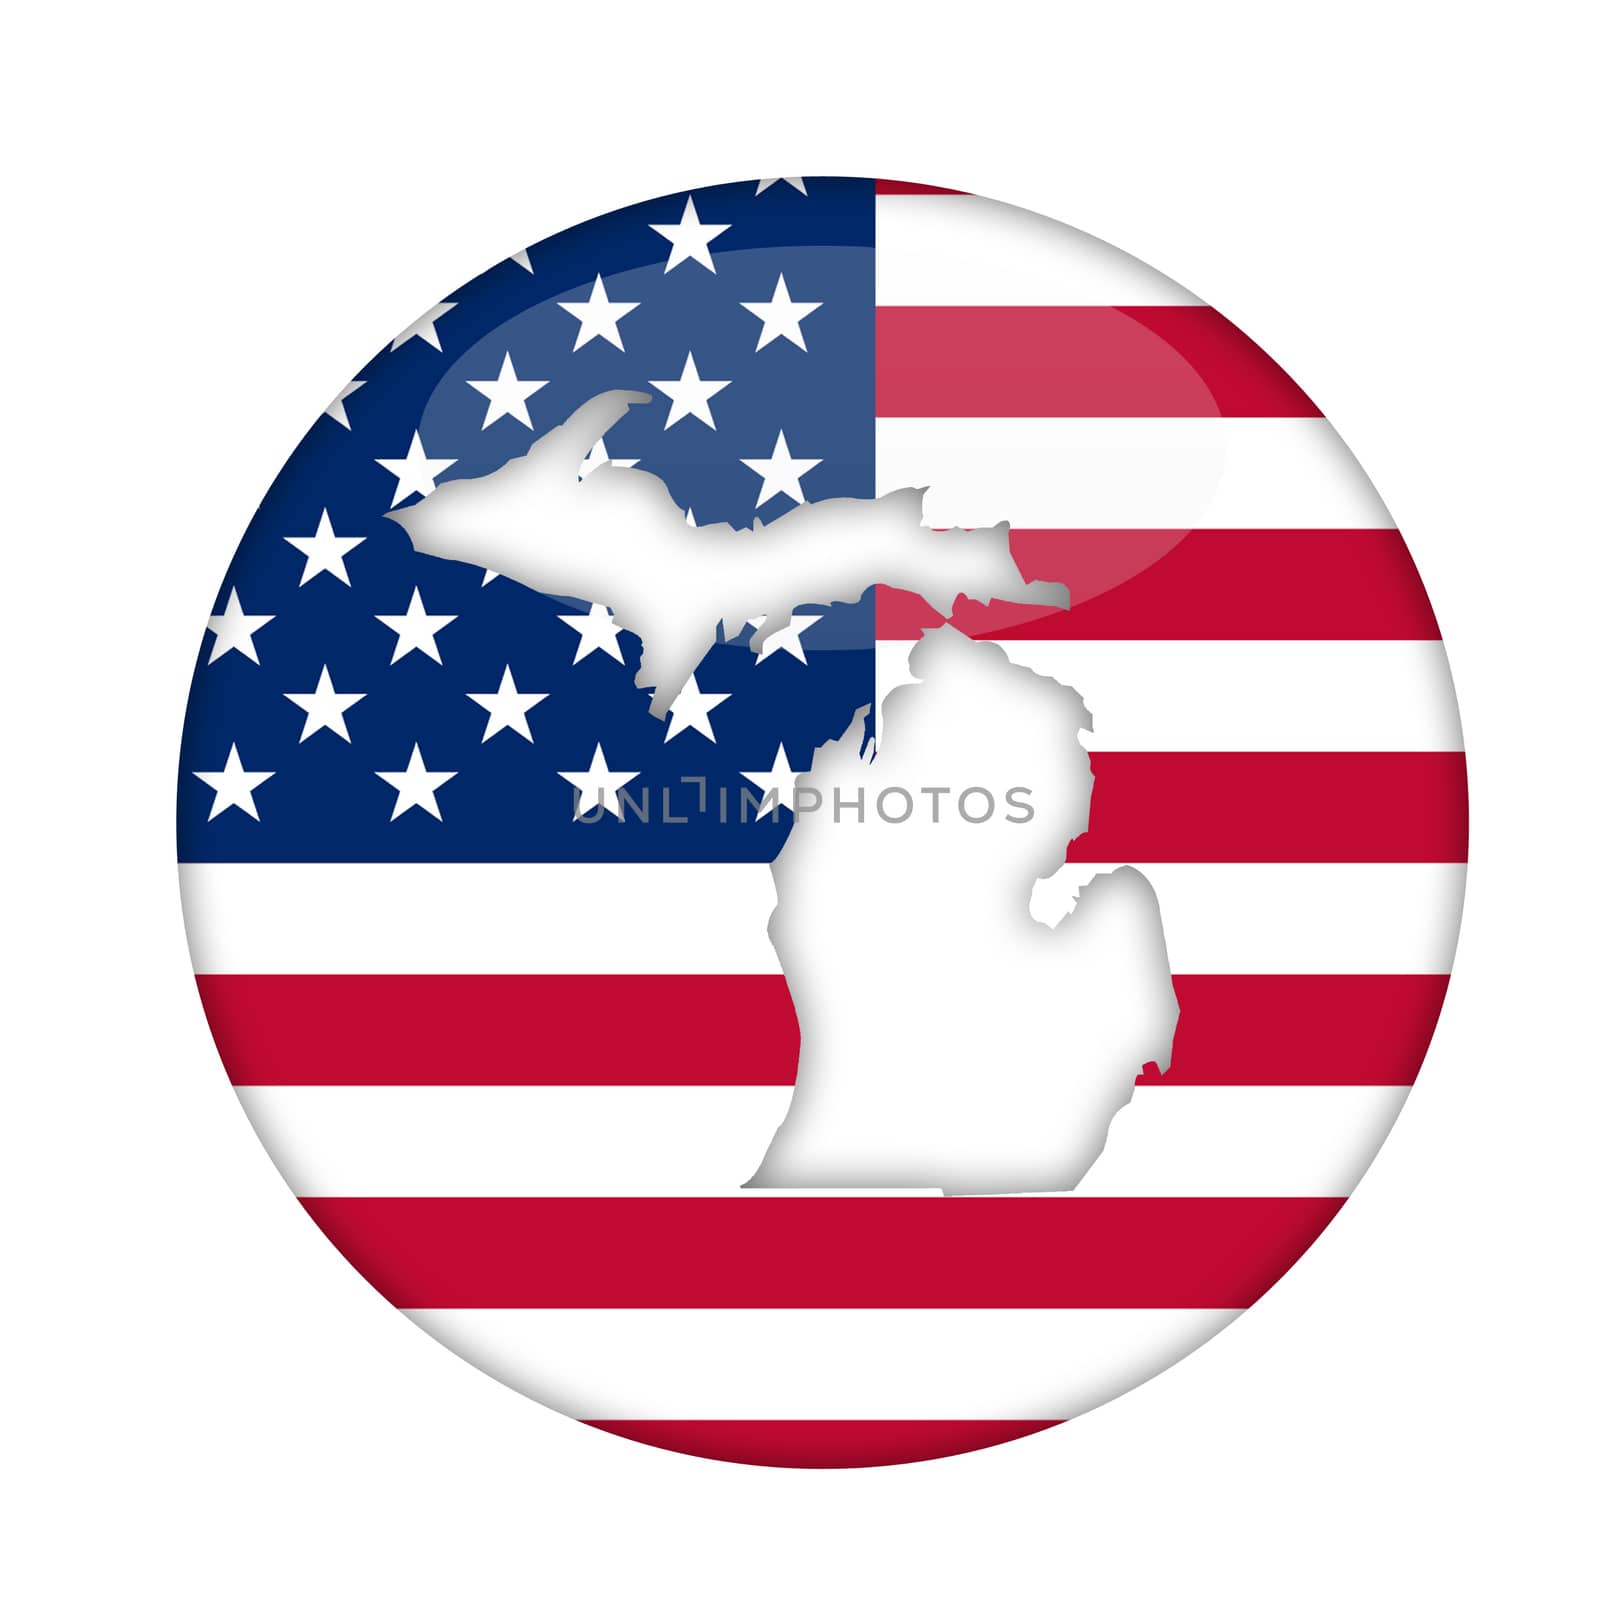 Michigan state of America badge isolated on a white background.